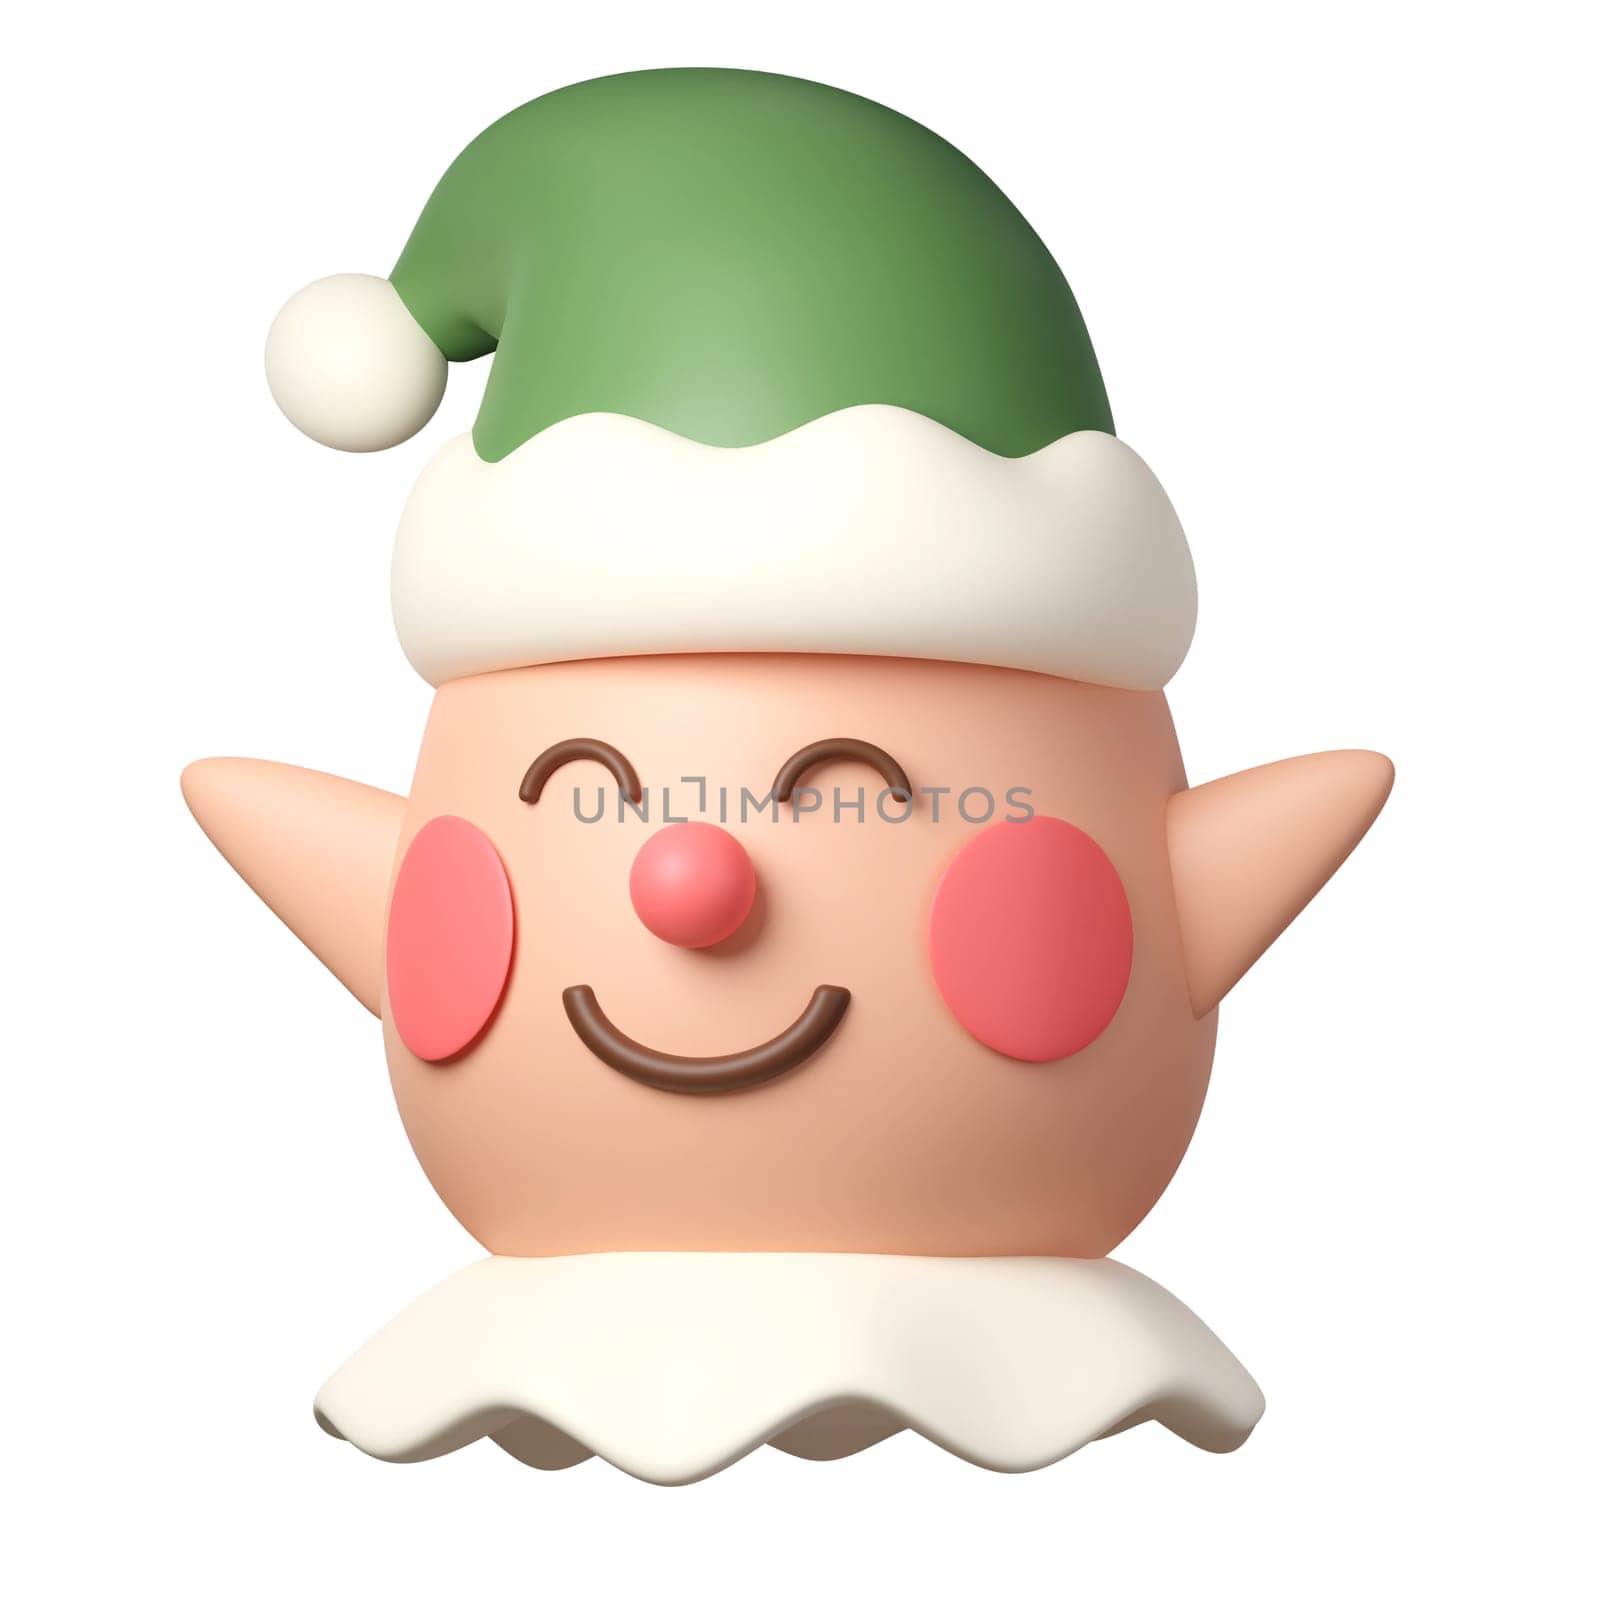 3d Christmas elf icon. minimal decorative festive conical shape tree. New Year's holiday decor. 3d design element In cartoon style. Icon isolated on white background. 3d illustration by meepiangraphic